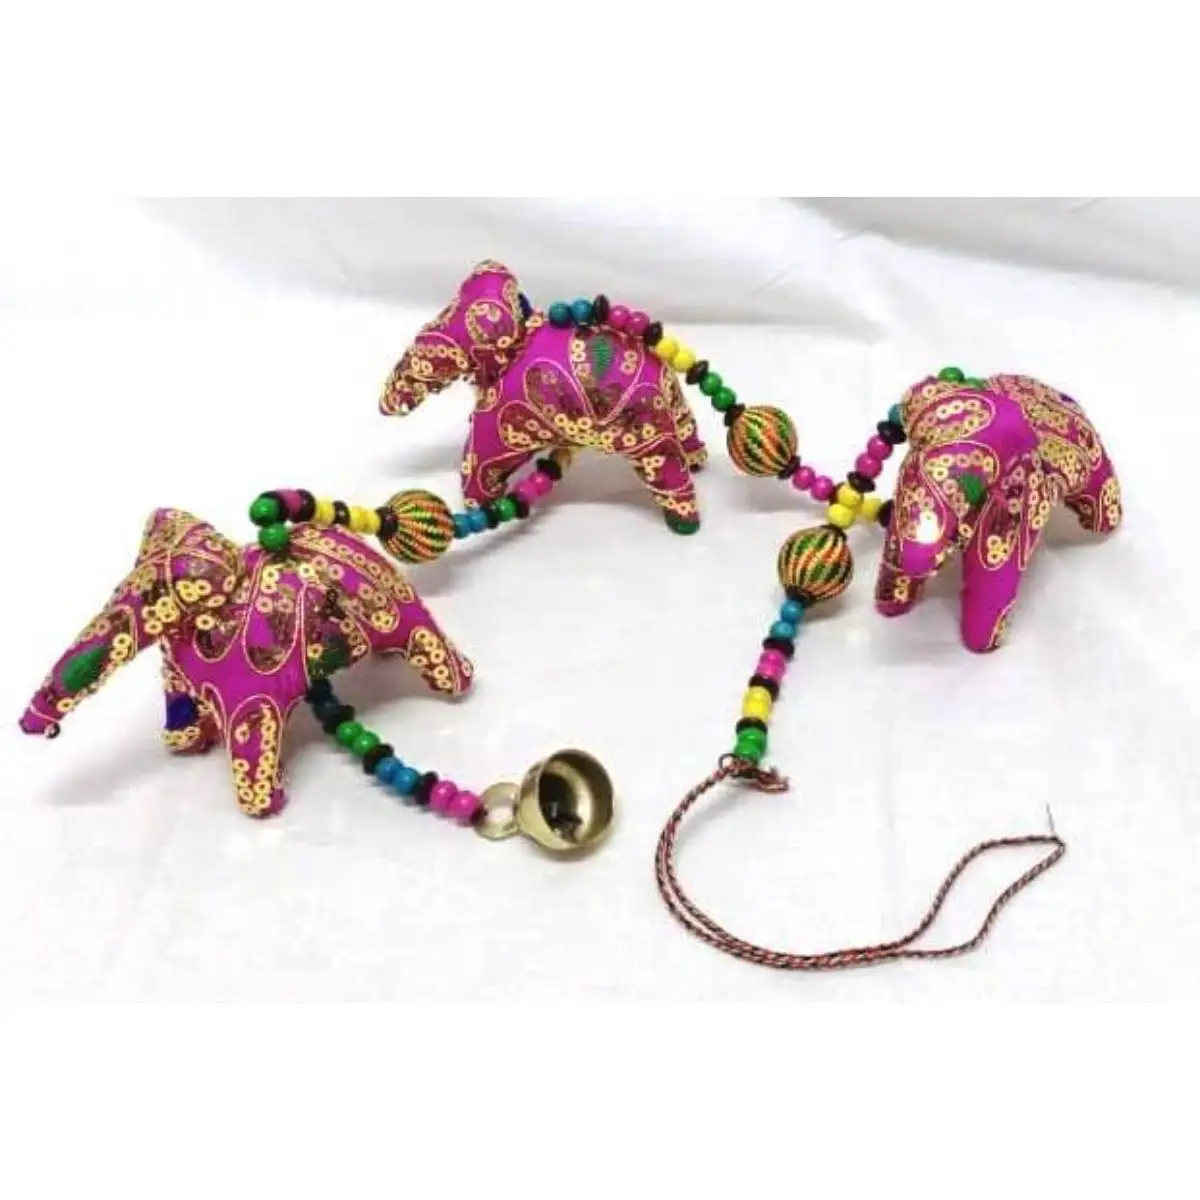 Indian Hanging Decorative Cotton Elephants in Vibrant Color Stringed with Beads and Bell for Wall/Door/Window